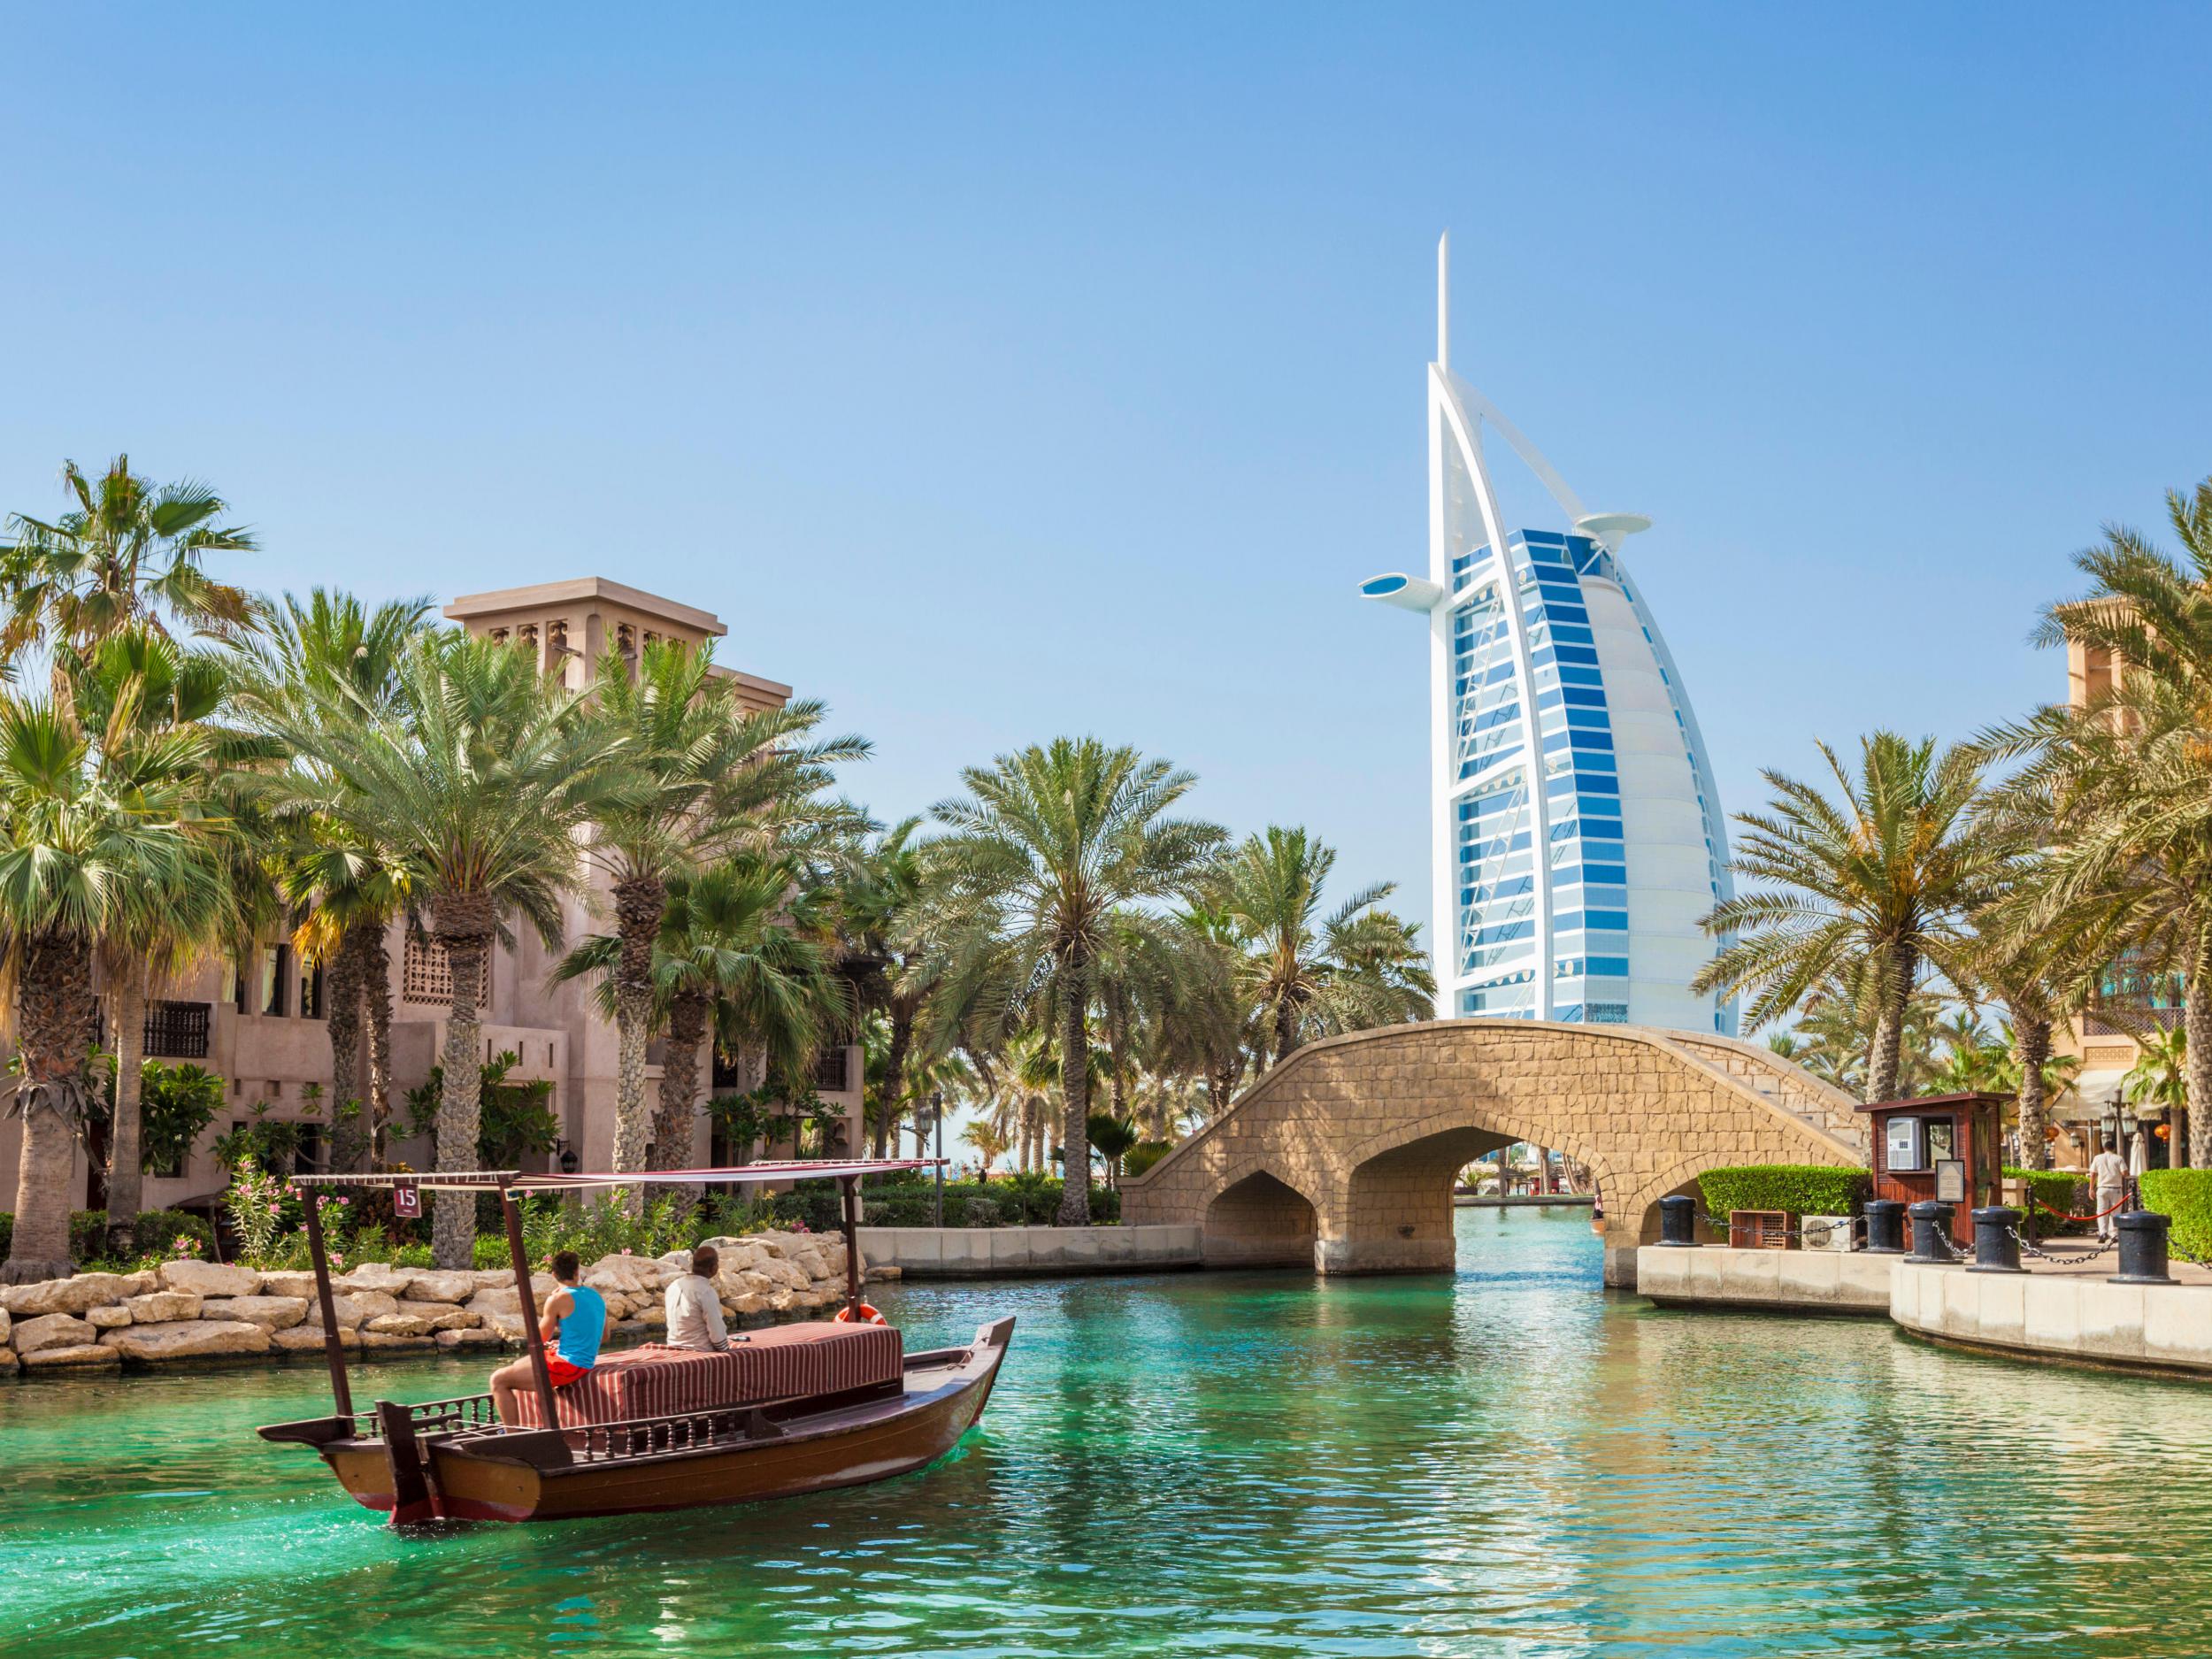 Dubai is featured on the list of cities where workers have the highest salaries